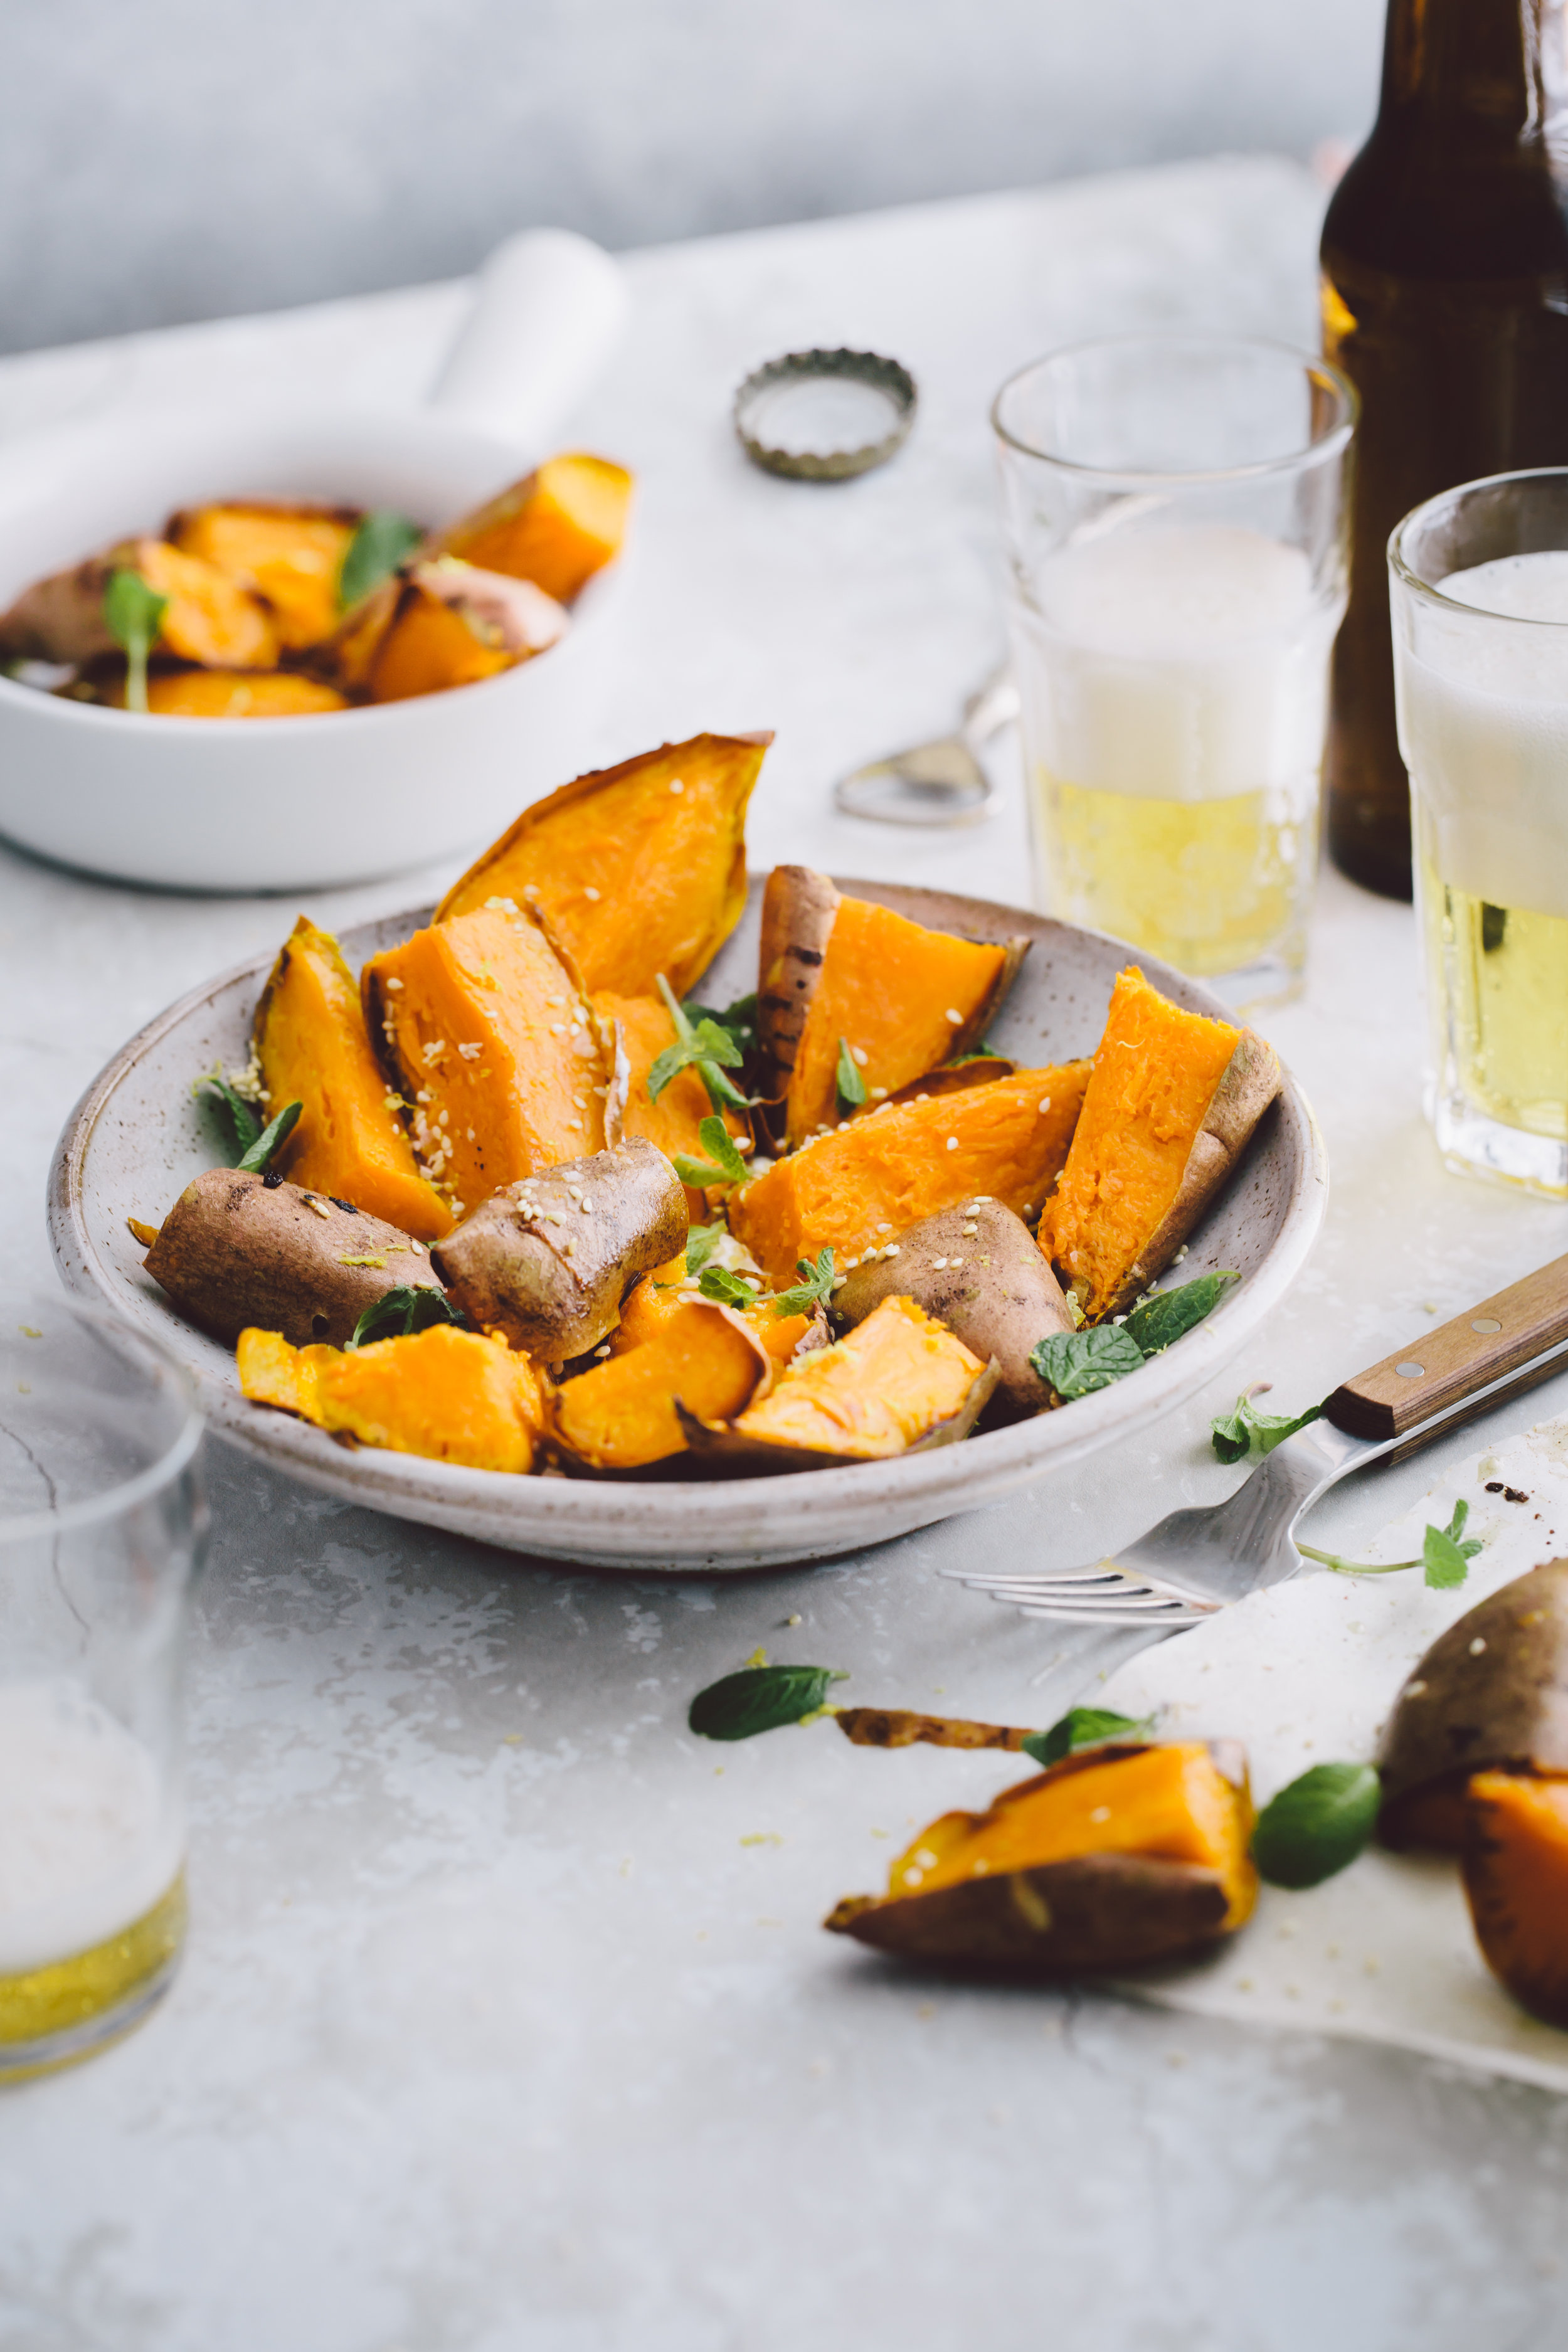 Roasted Sweet Potatoes with mints